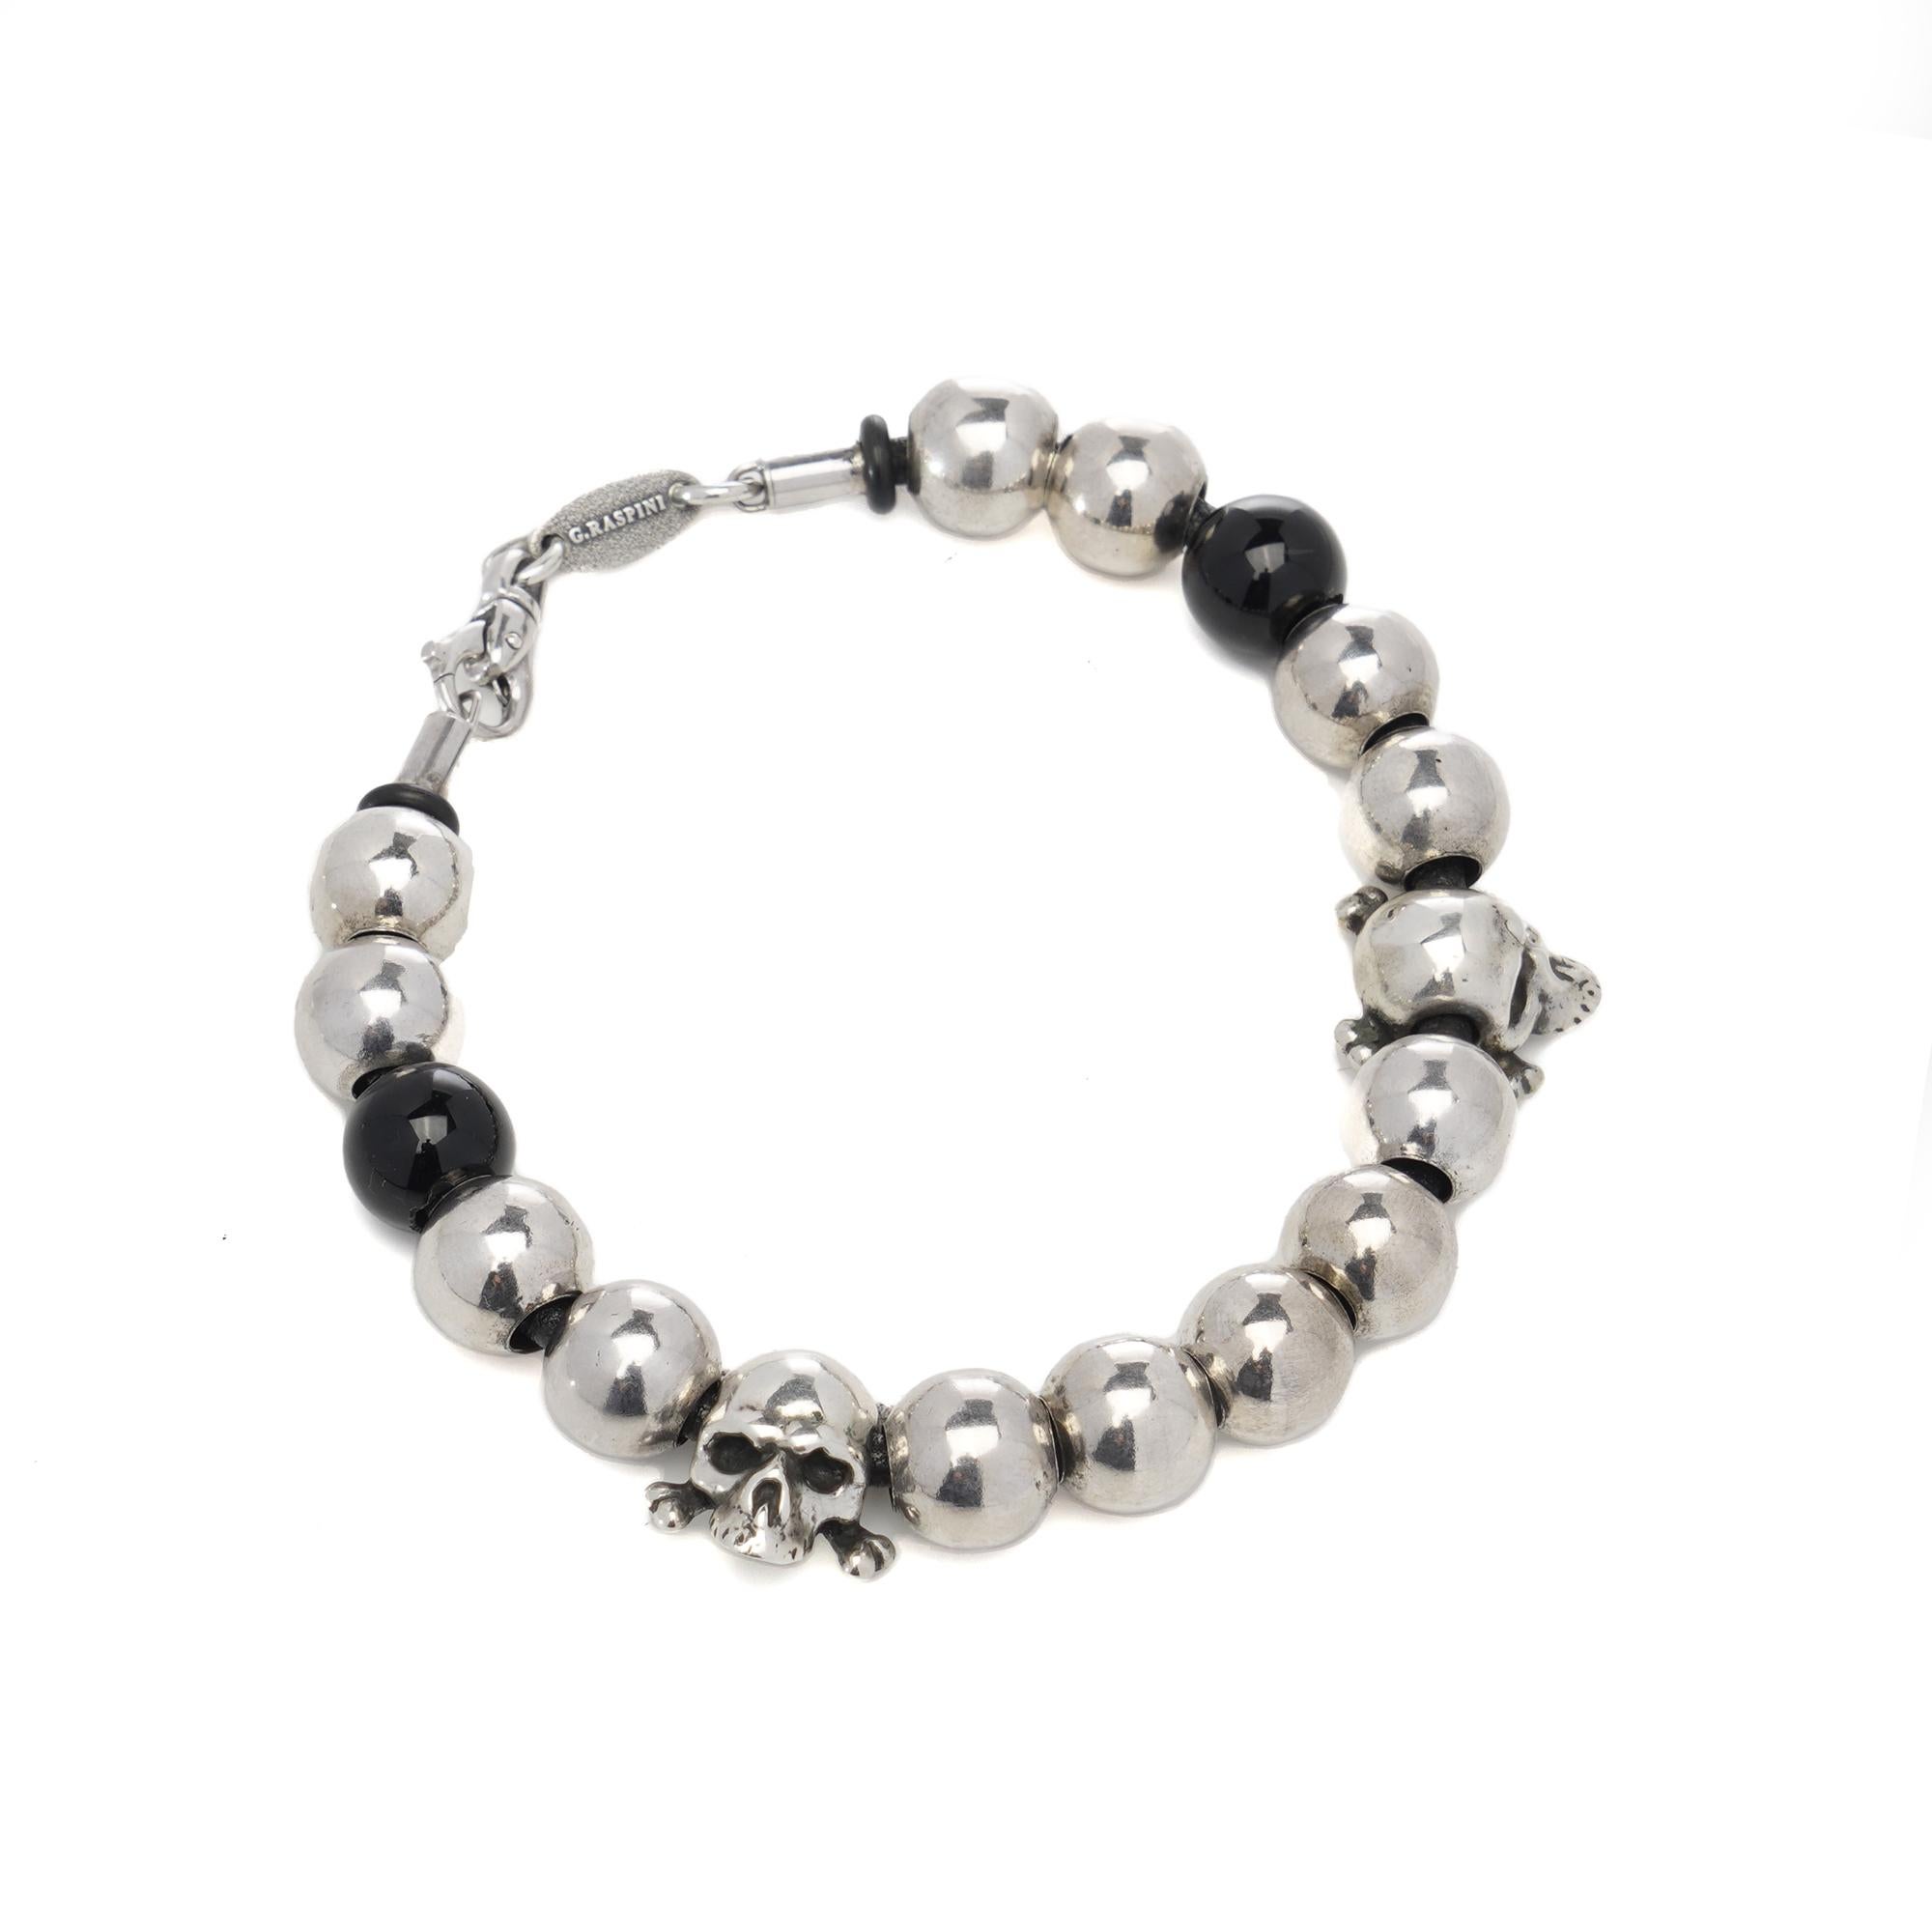 Giovani Raspini sterling 925 silver bead bracelet with skull accents In Good Condition For Sale In Braintree, GB